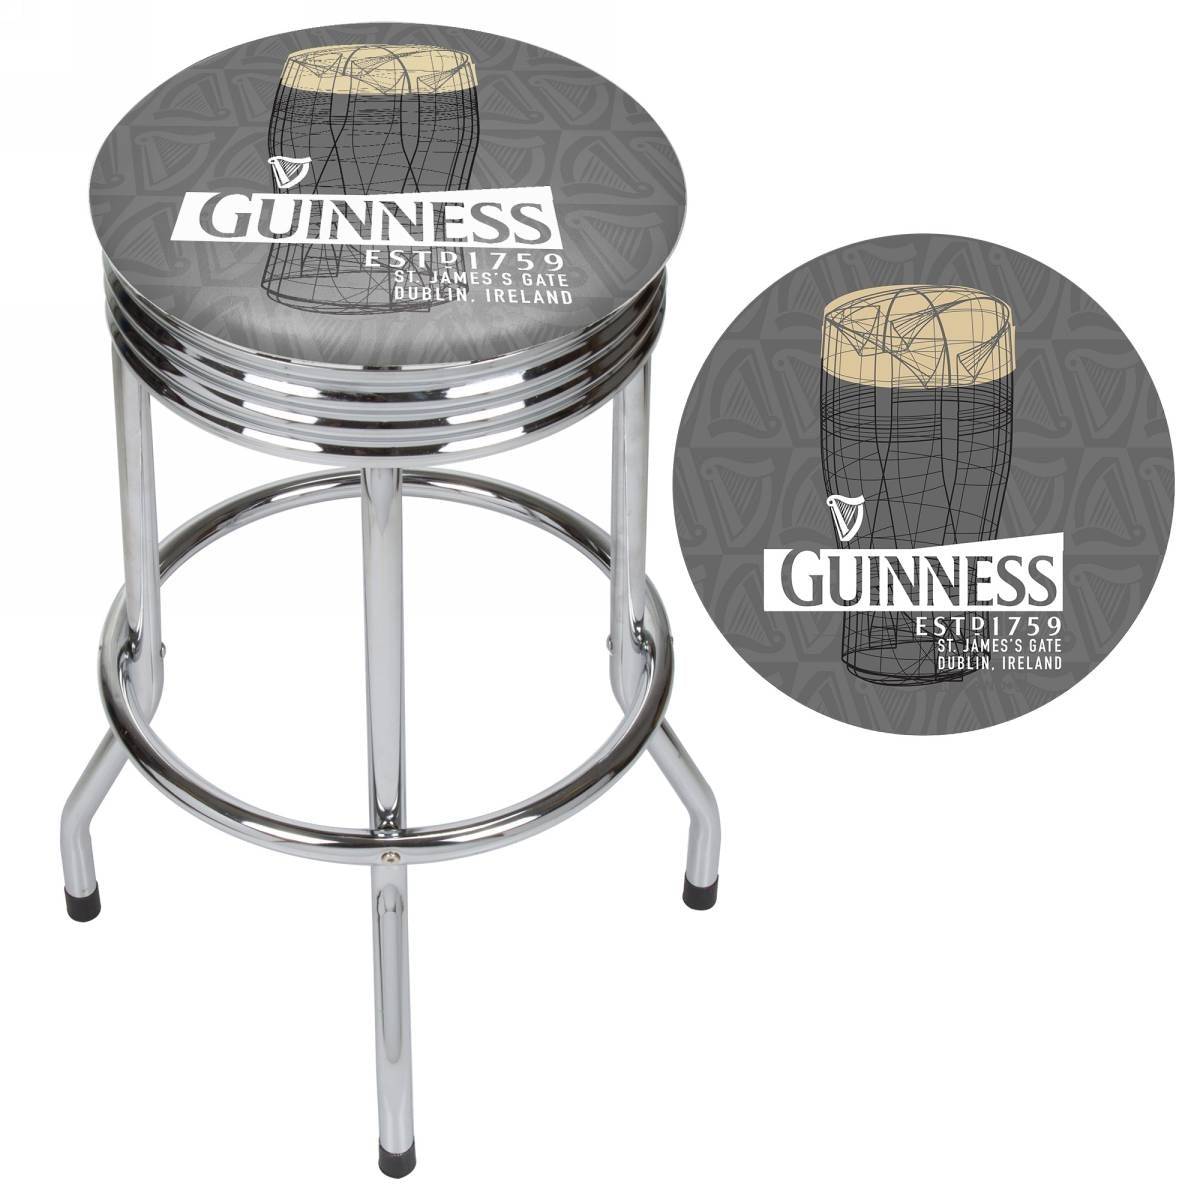 Guinness fans will love the Guinness Chrome Ribbed Bar Stool - Line Art Pint featuring Line Art Pint details. The stool is stylishly designed with a Chrome Ribbed Swivel Barstool mechanism, adding a touch.